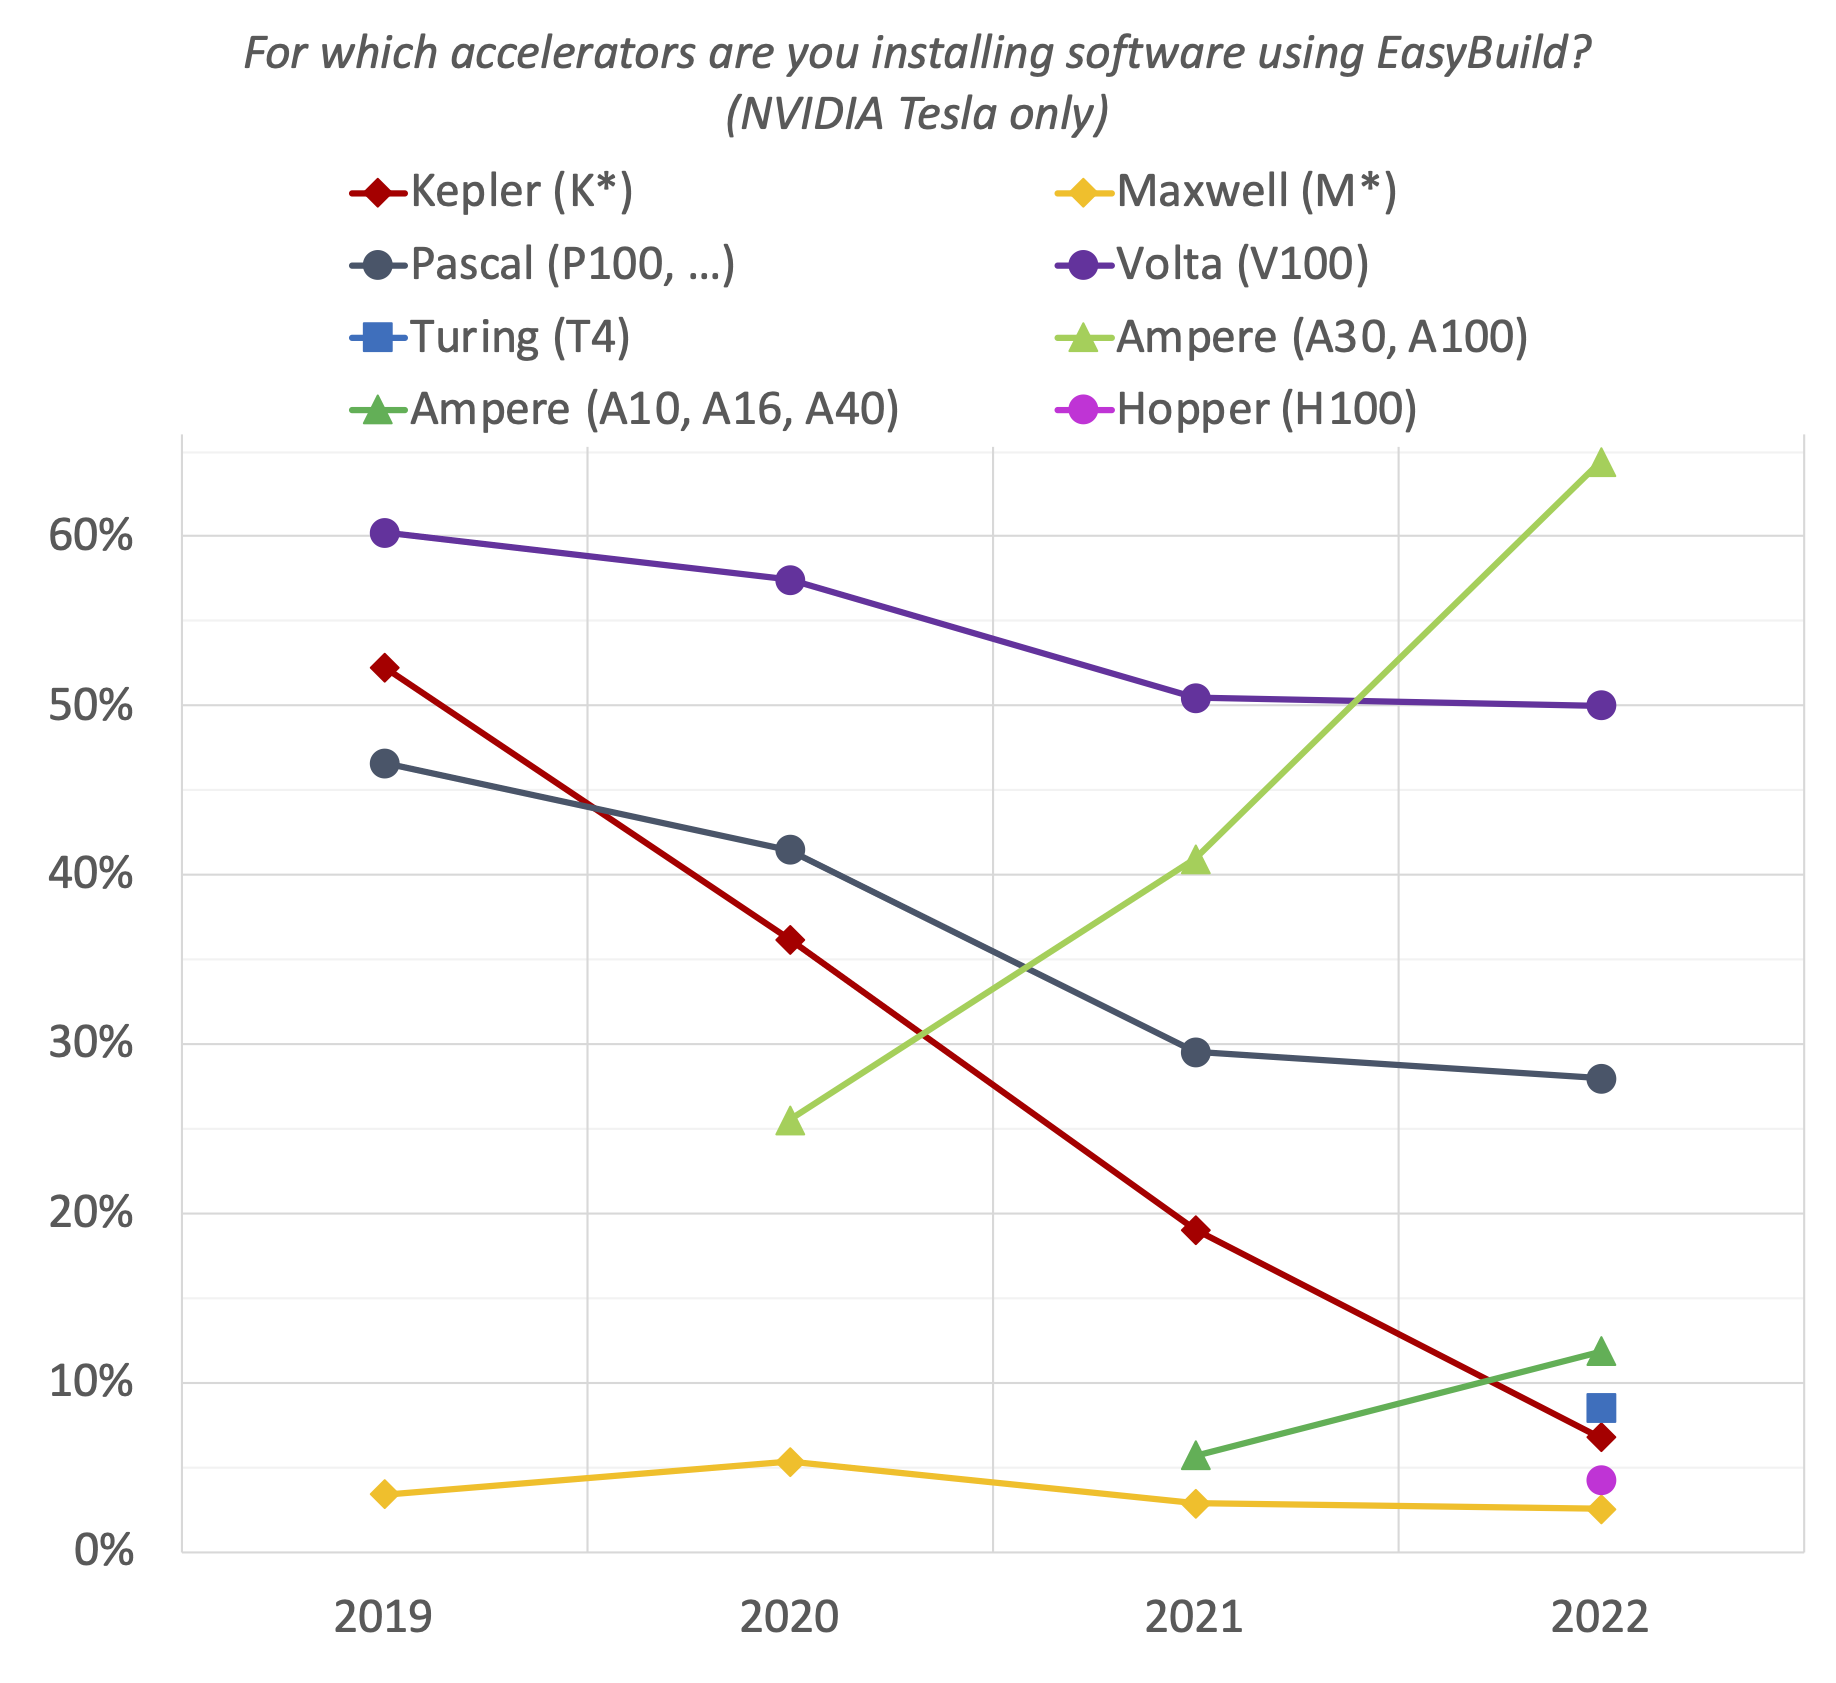 16. For which accelerators are you installing software using EasyBuild? (NVIDIA Tesla only)